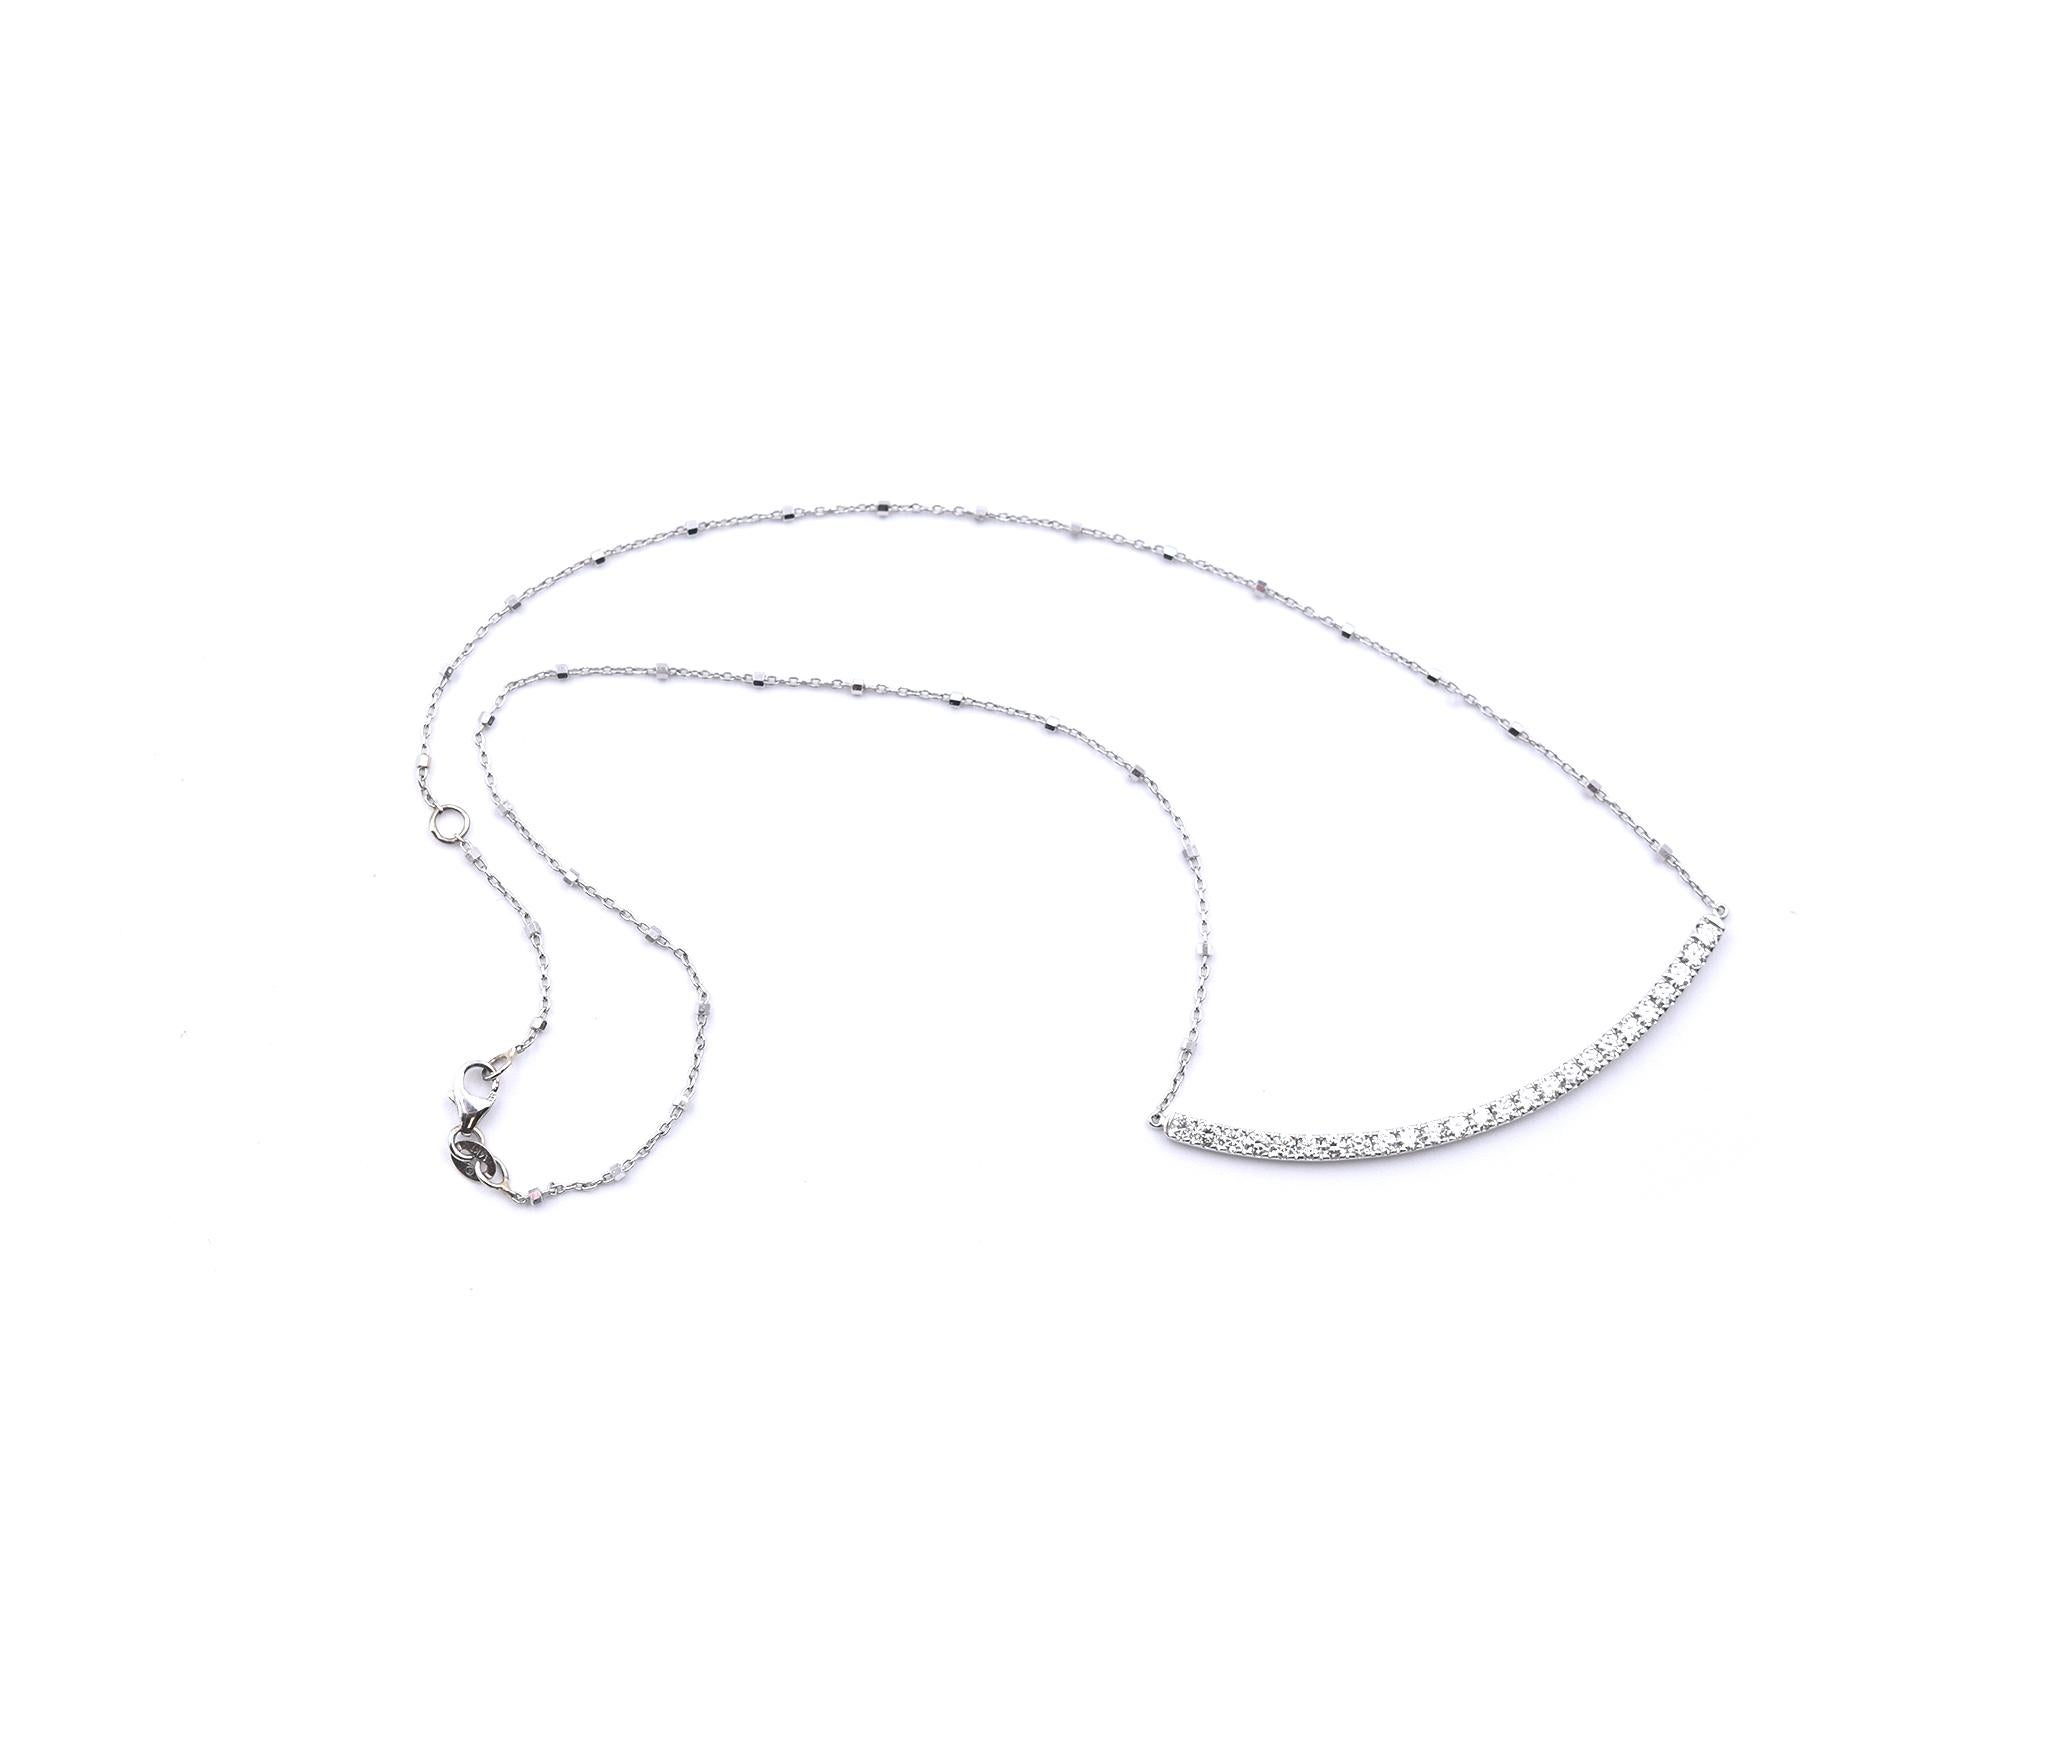 Material: 14k white gold
Diamonds: 25 round brilliant cuts = 1.03cttw
Color: G
Clarity: VS
Dimensions: necklace measures 16-inches in length, pendant measures 56.55mm x 2.55mm
Weight: 4.45 grams